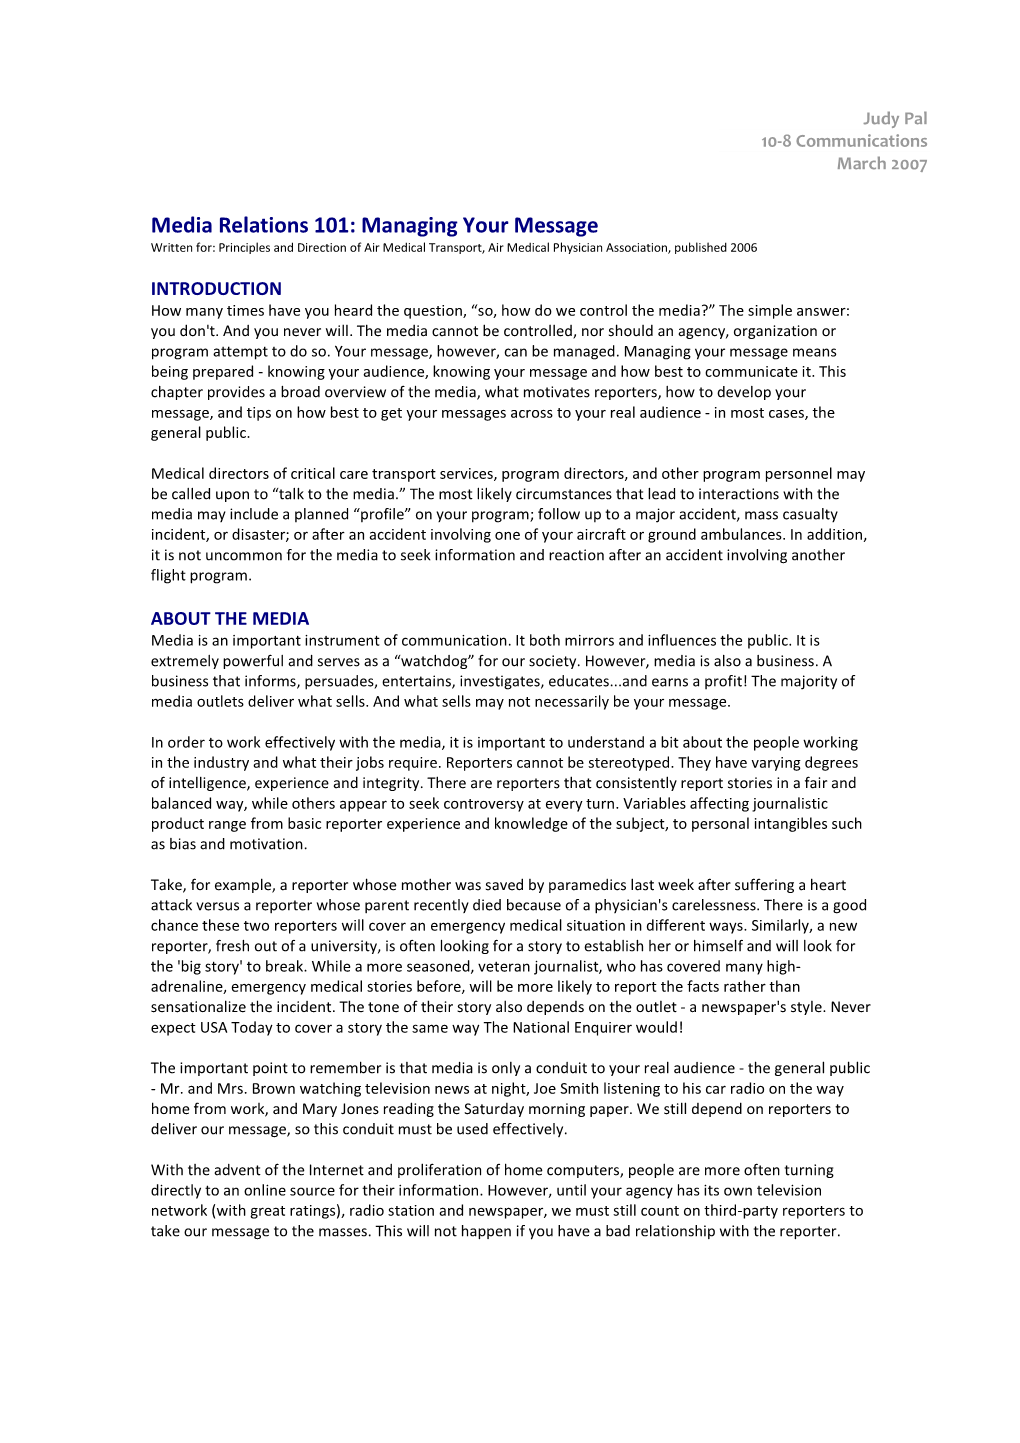 Media Relations 101: Managing Your Message Written For: Principles and Direction of Air Medical Transport, Air Medical Physician Association, Published 2006